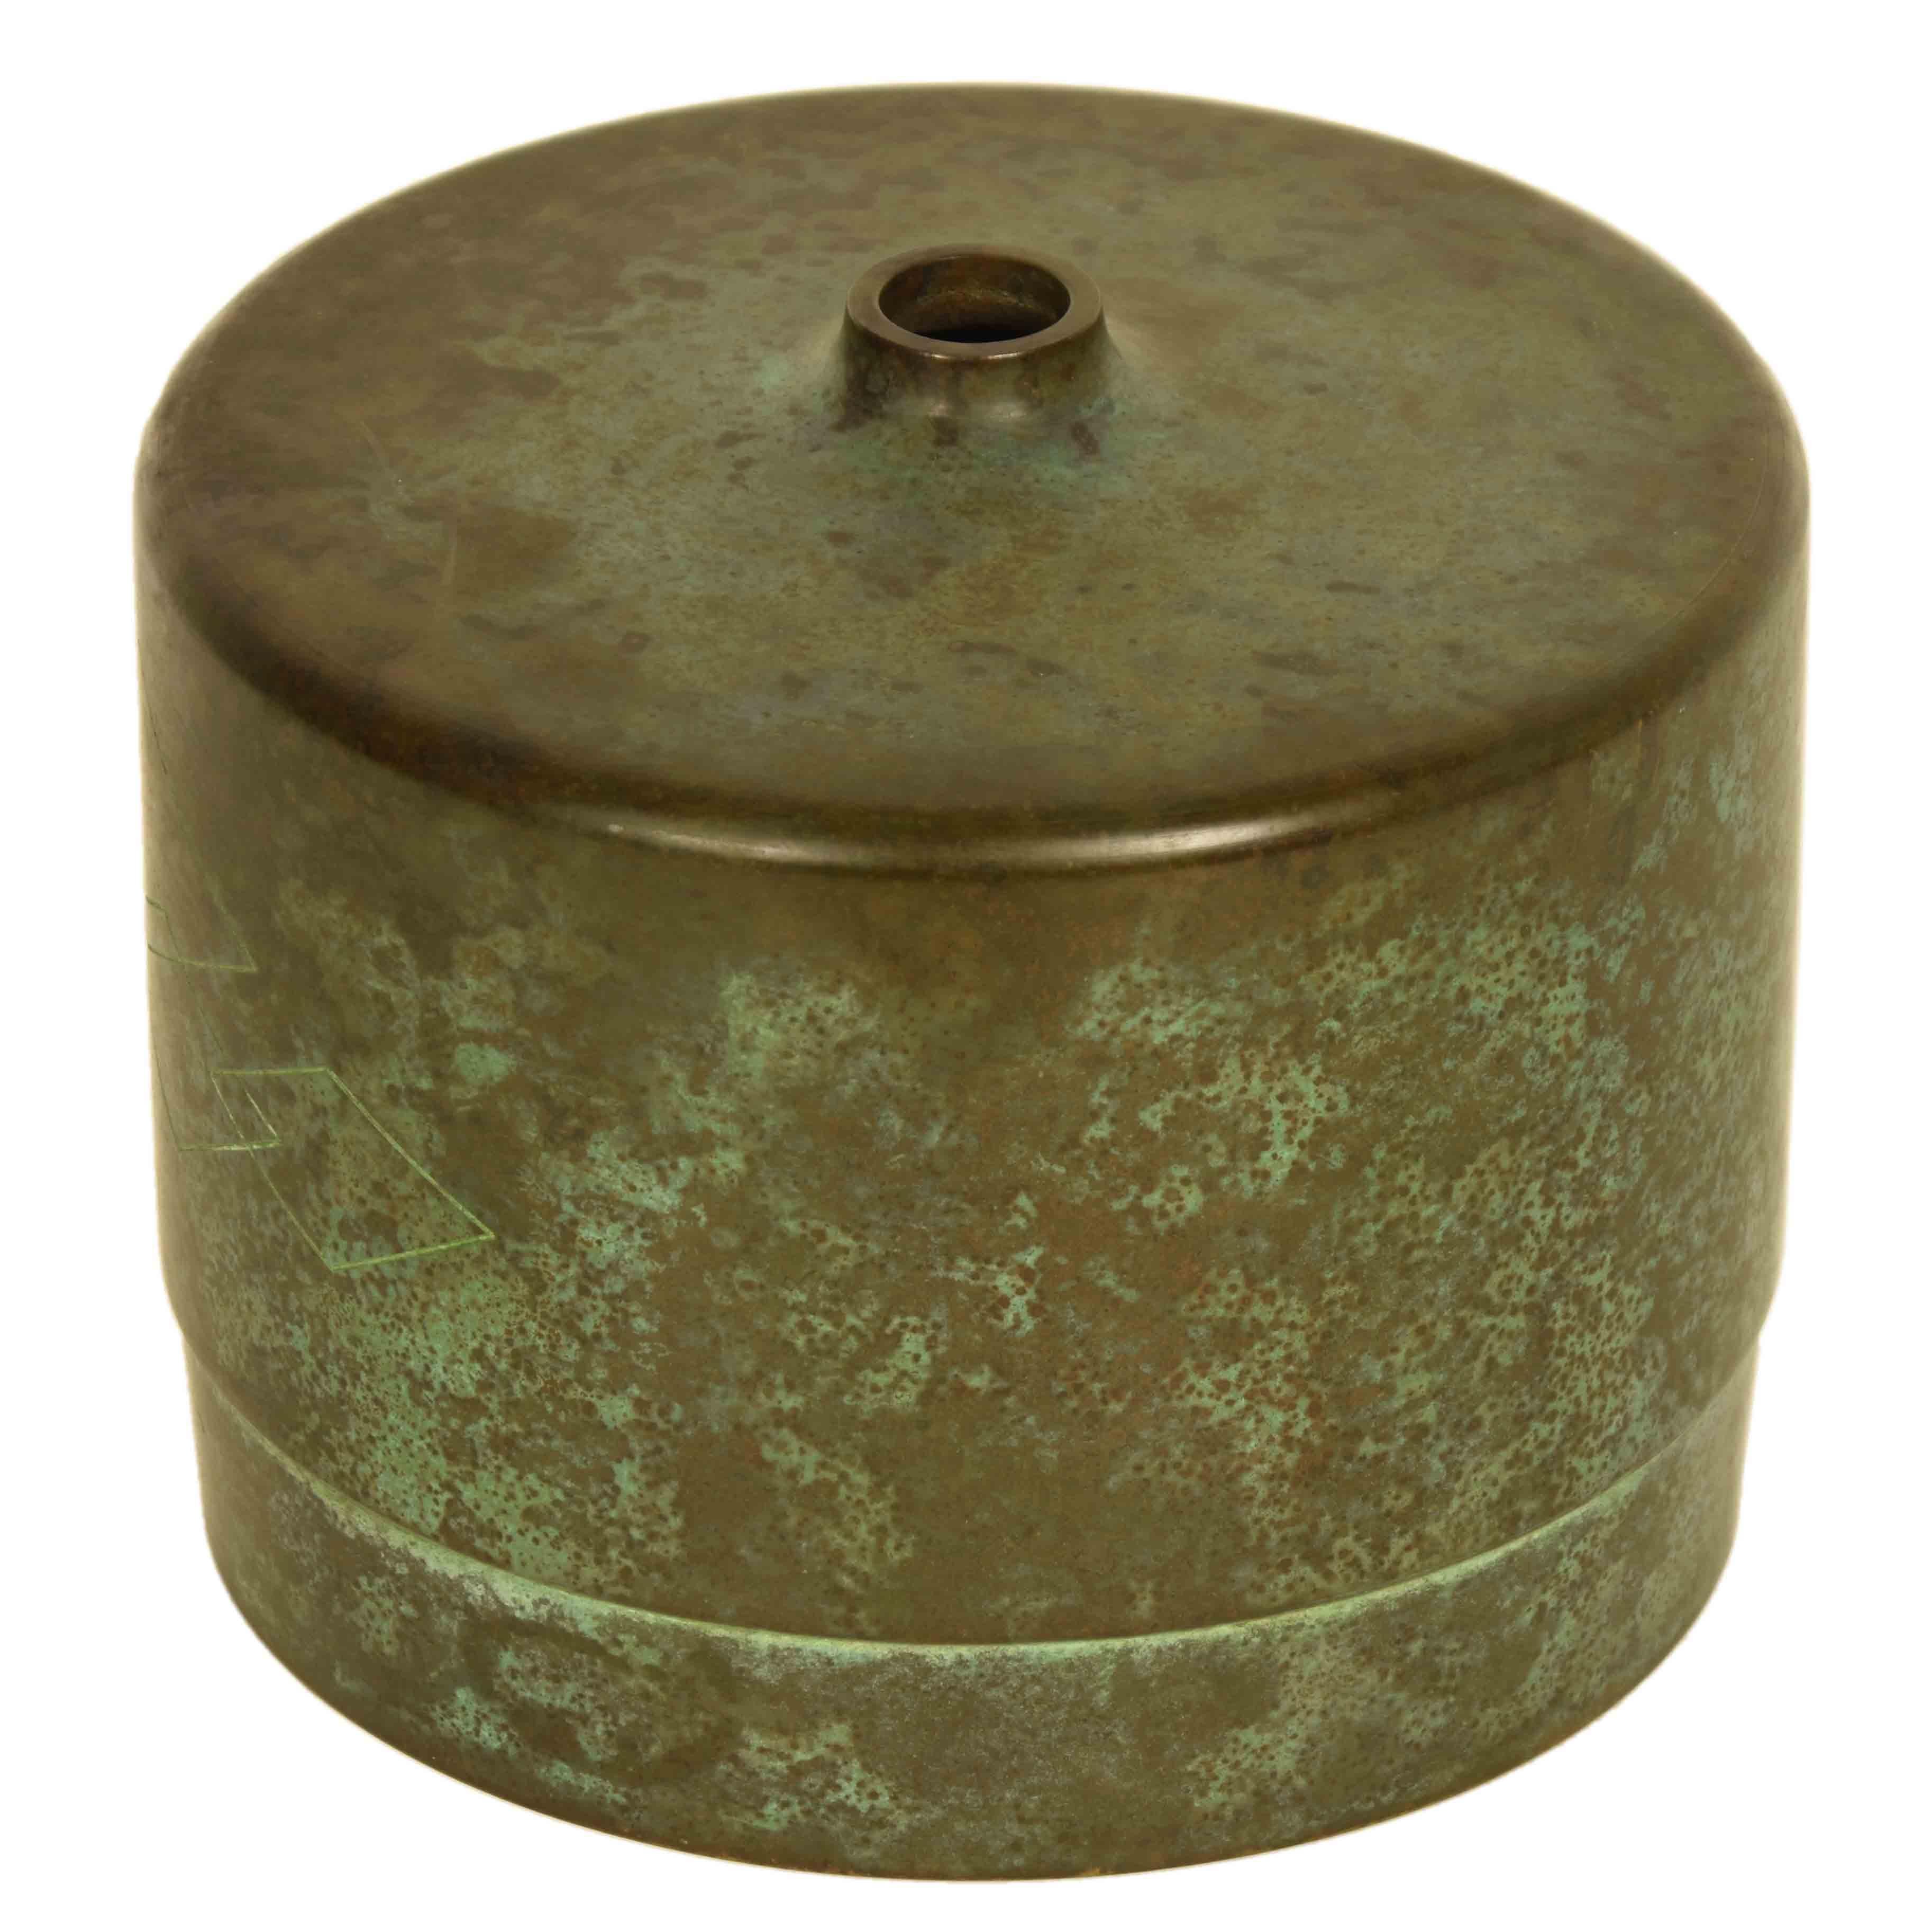 A vintage, mid-century Japanese bronze vase from Takaoka. Takaoka is a city on the main island of Honshu. While bronze work originated in China, Japanese artisans have developed an array of techniques in the production of decorative bronzes that